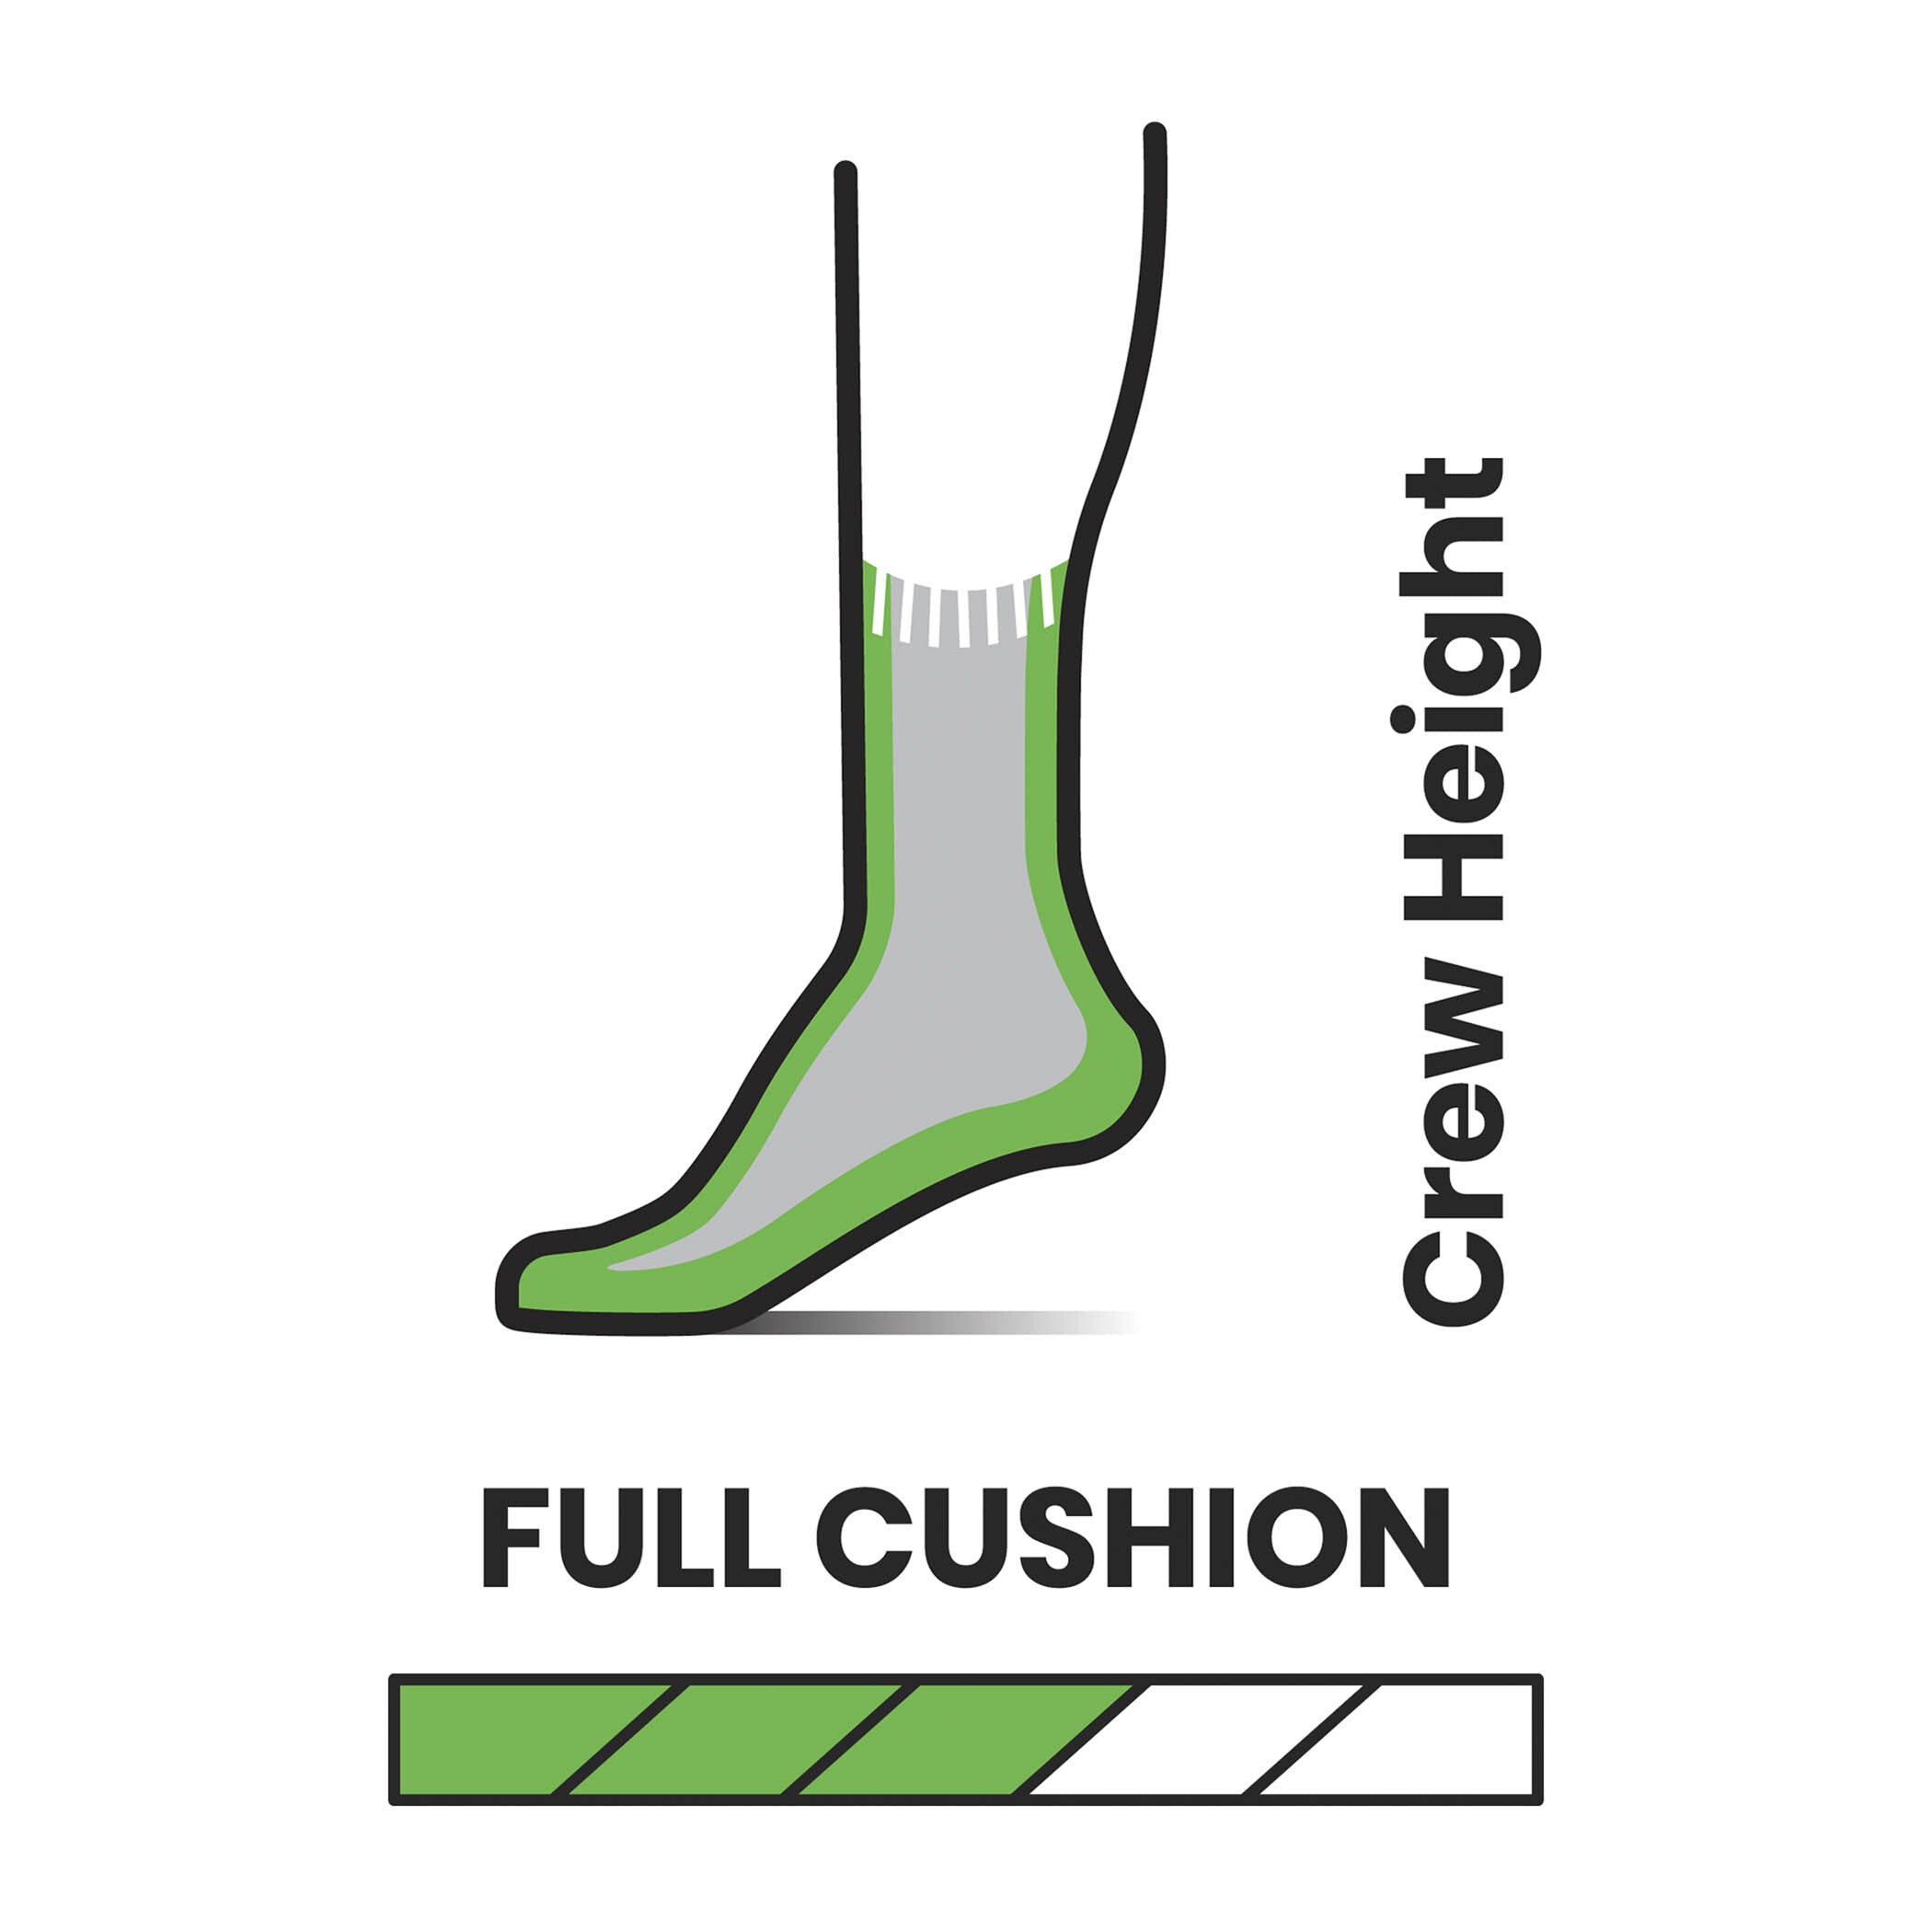 Smartwool Women's Hike Full Cushion Crew Sock | SMARTWOOL | Portwest - The Outdoor Shop